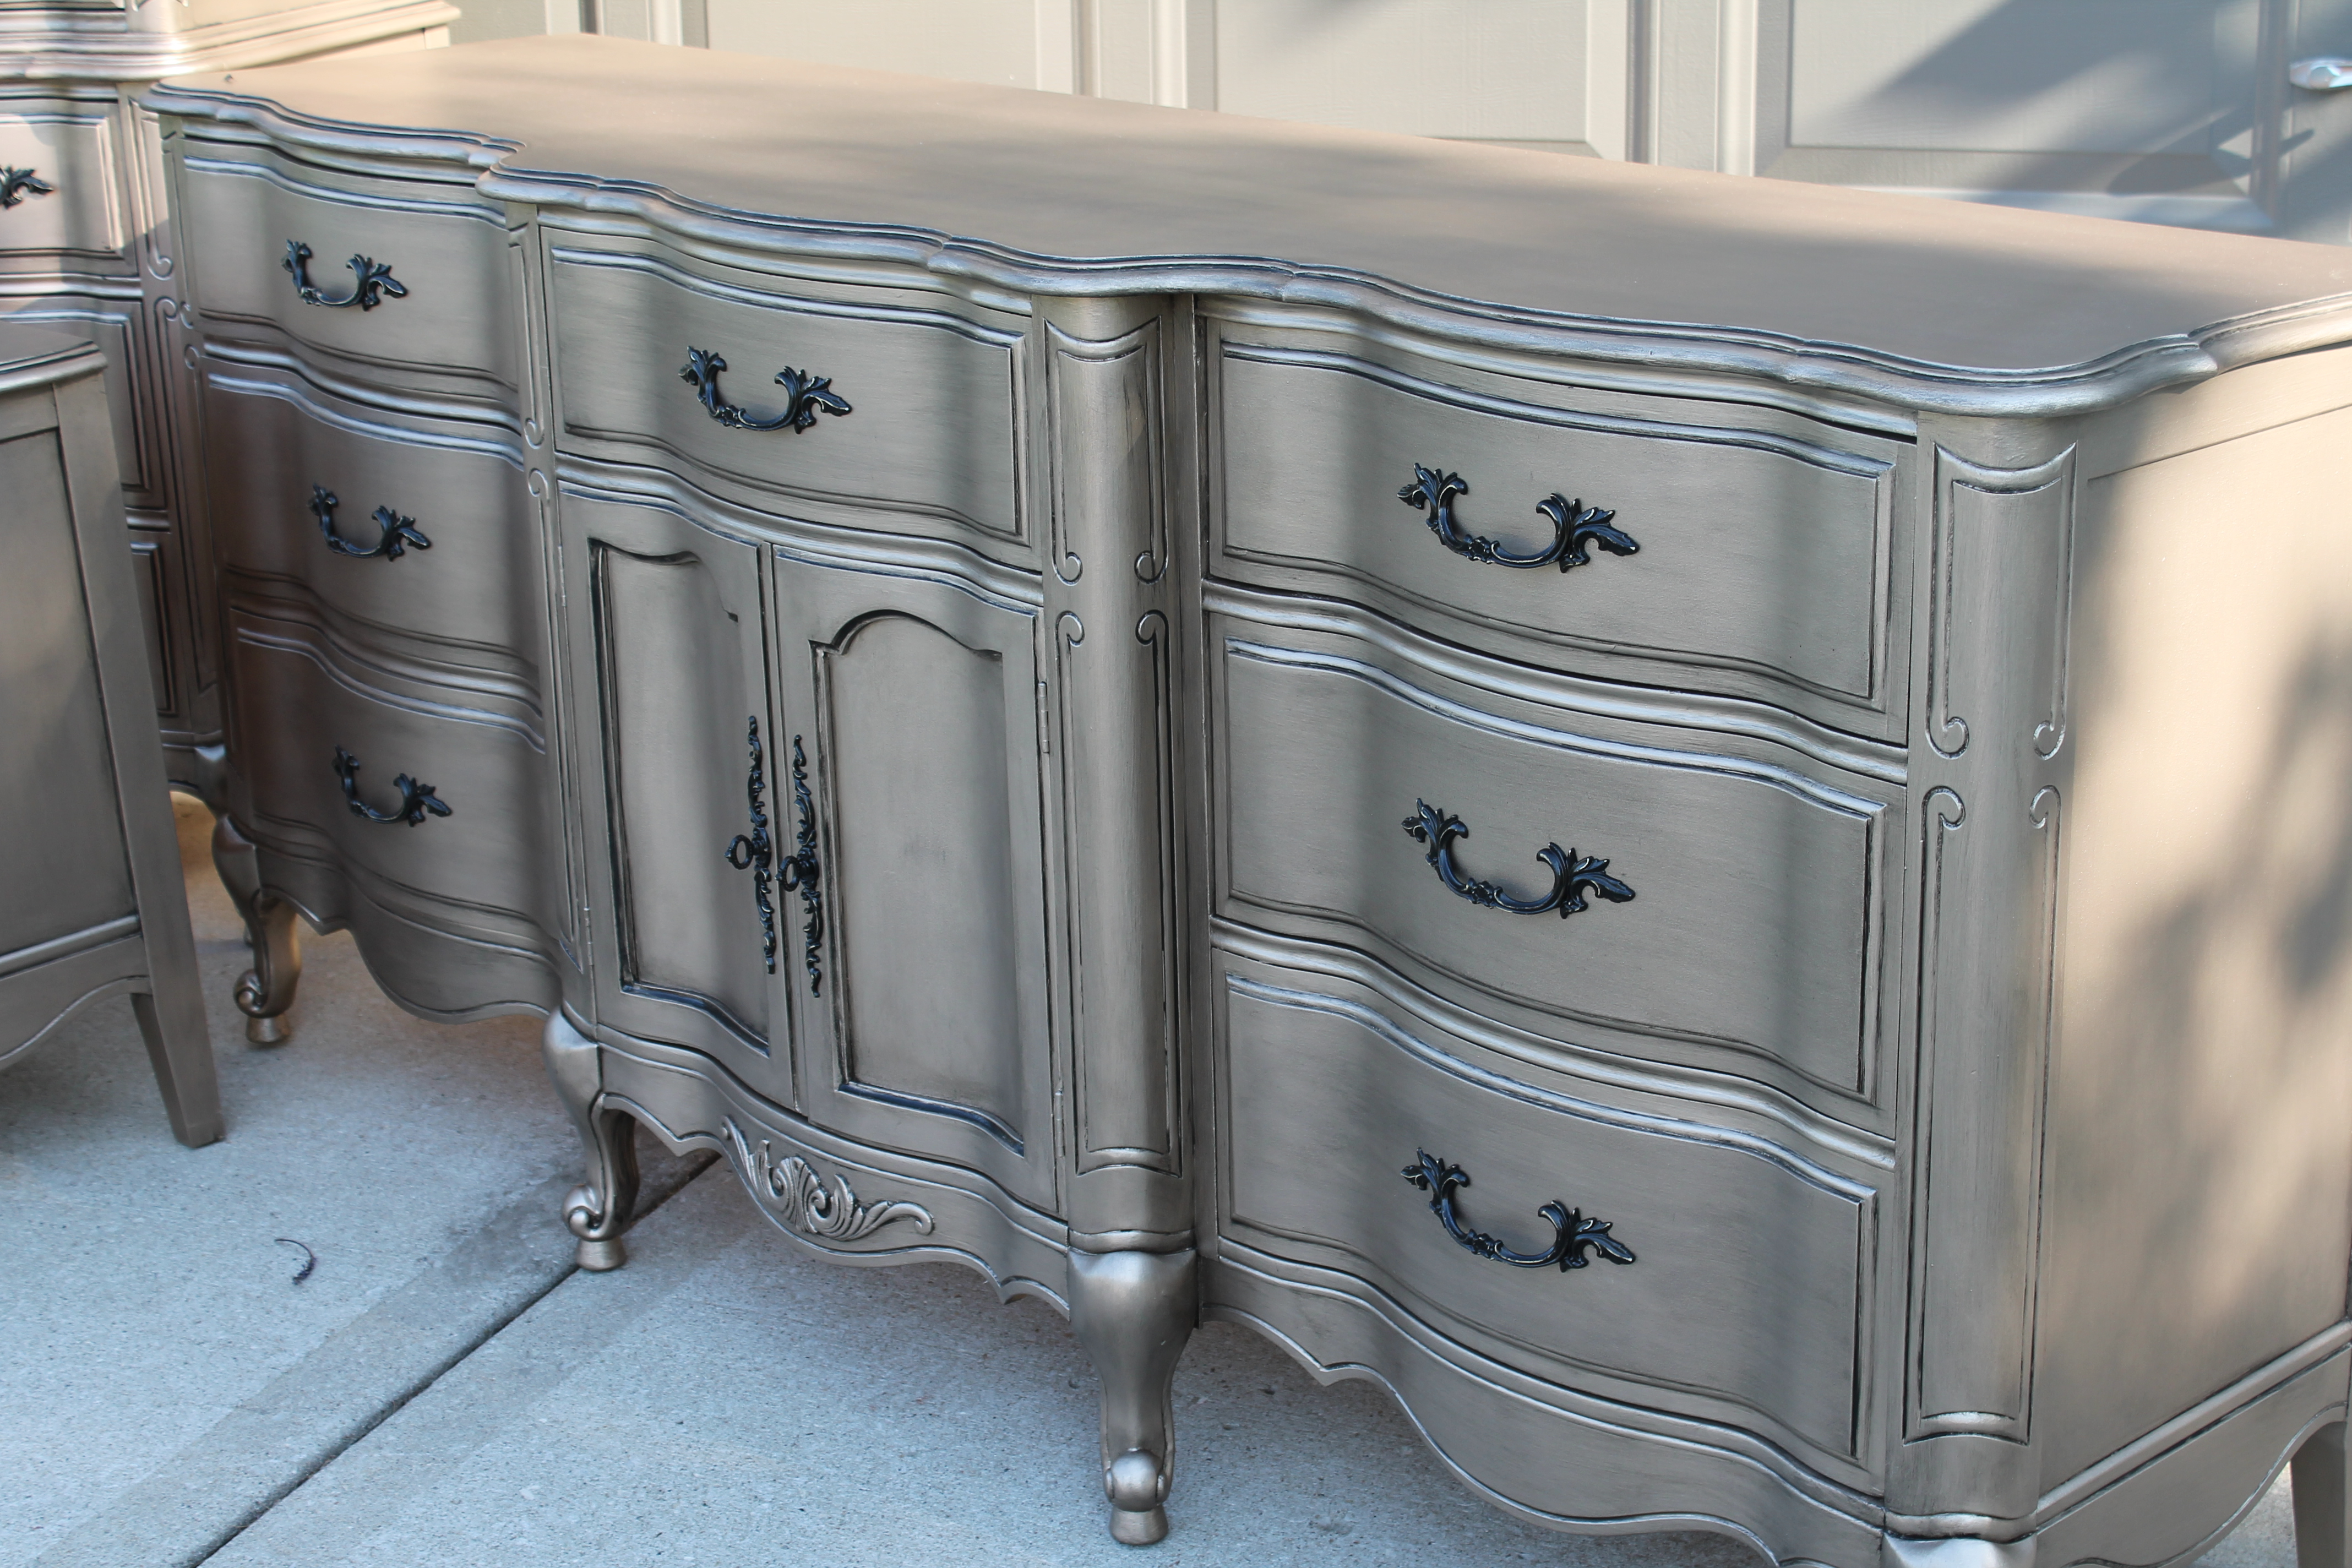 How to Paint Furniture with Metallic Paint - Lost & Found Decor